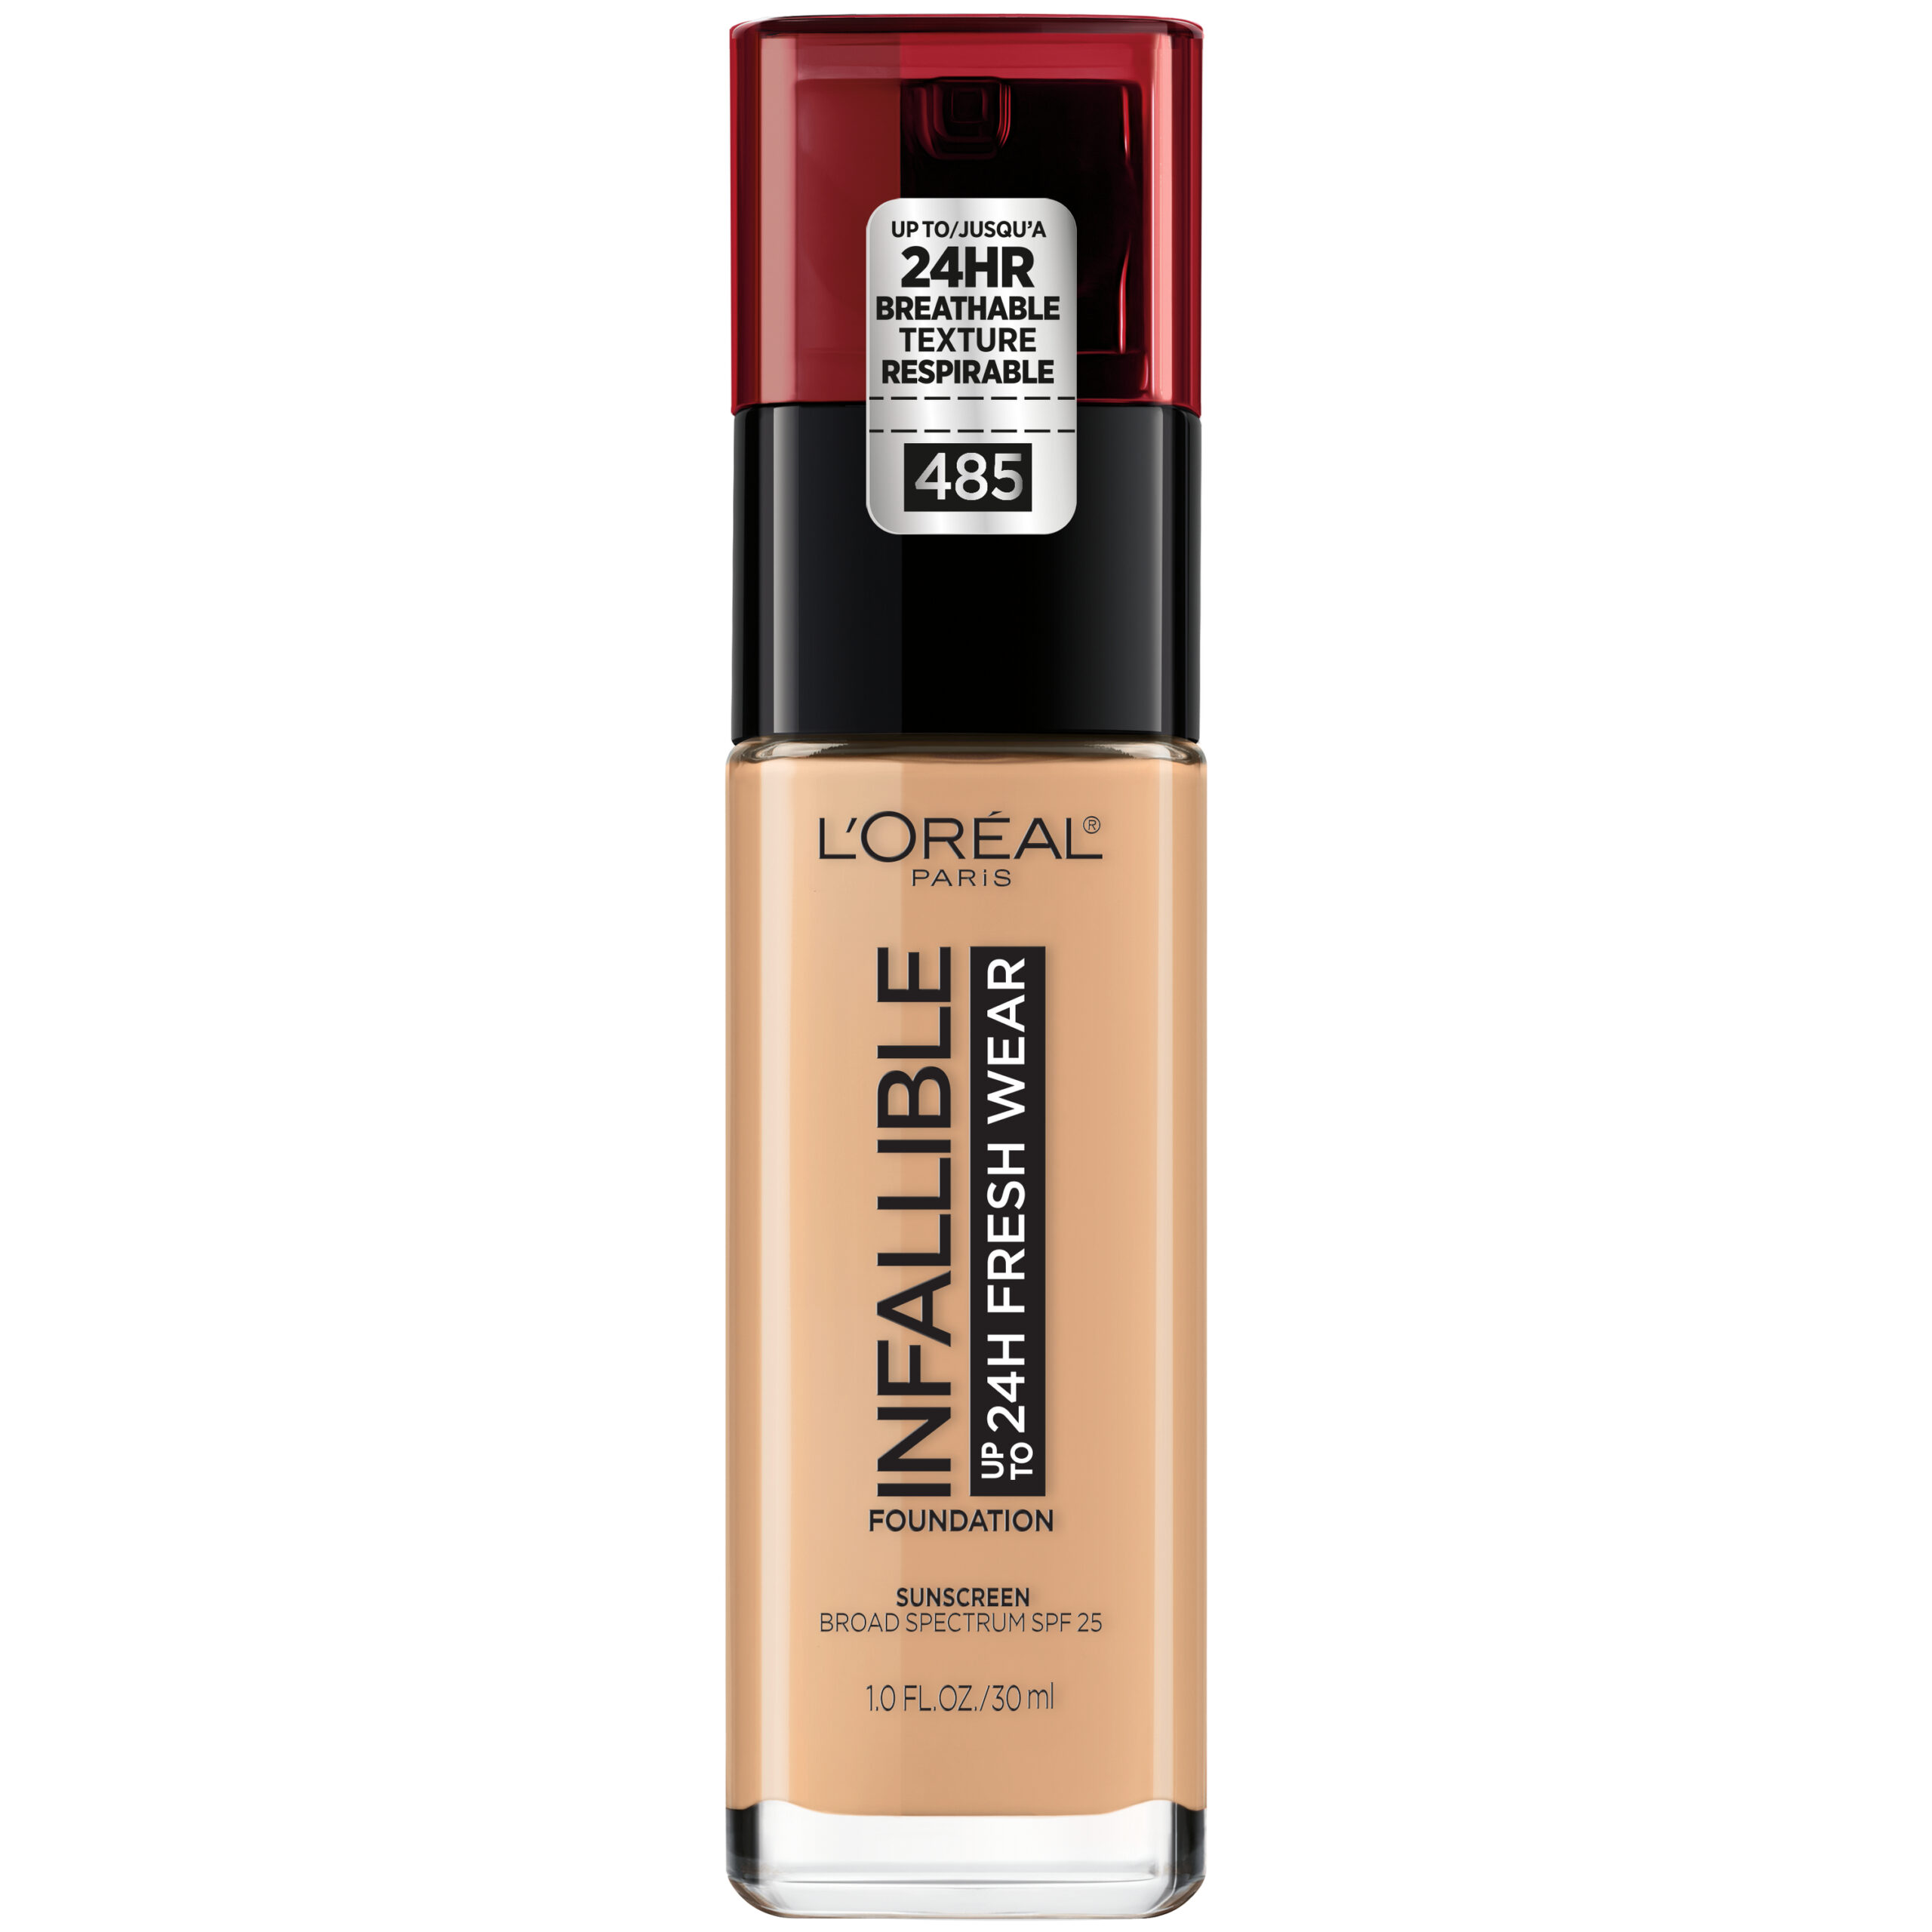 Bottle of L'Oreal Infallible foundation.